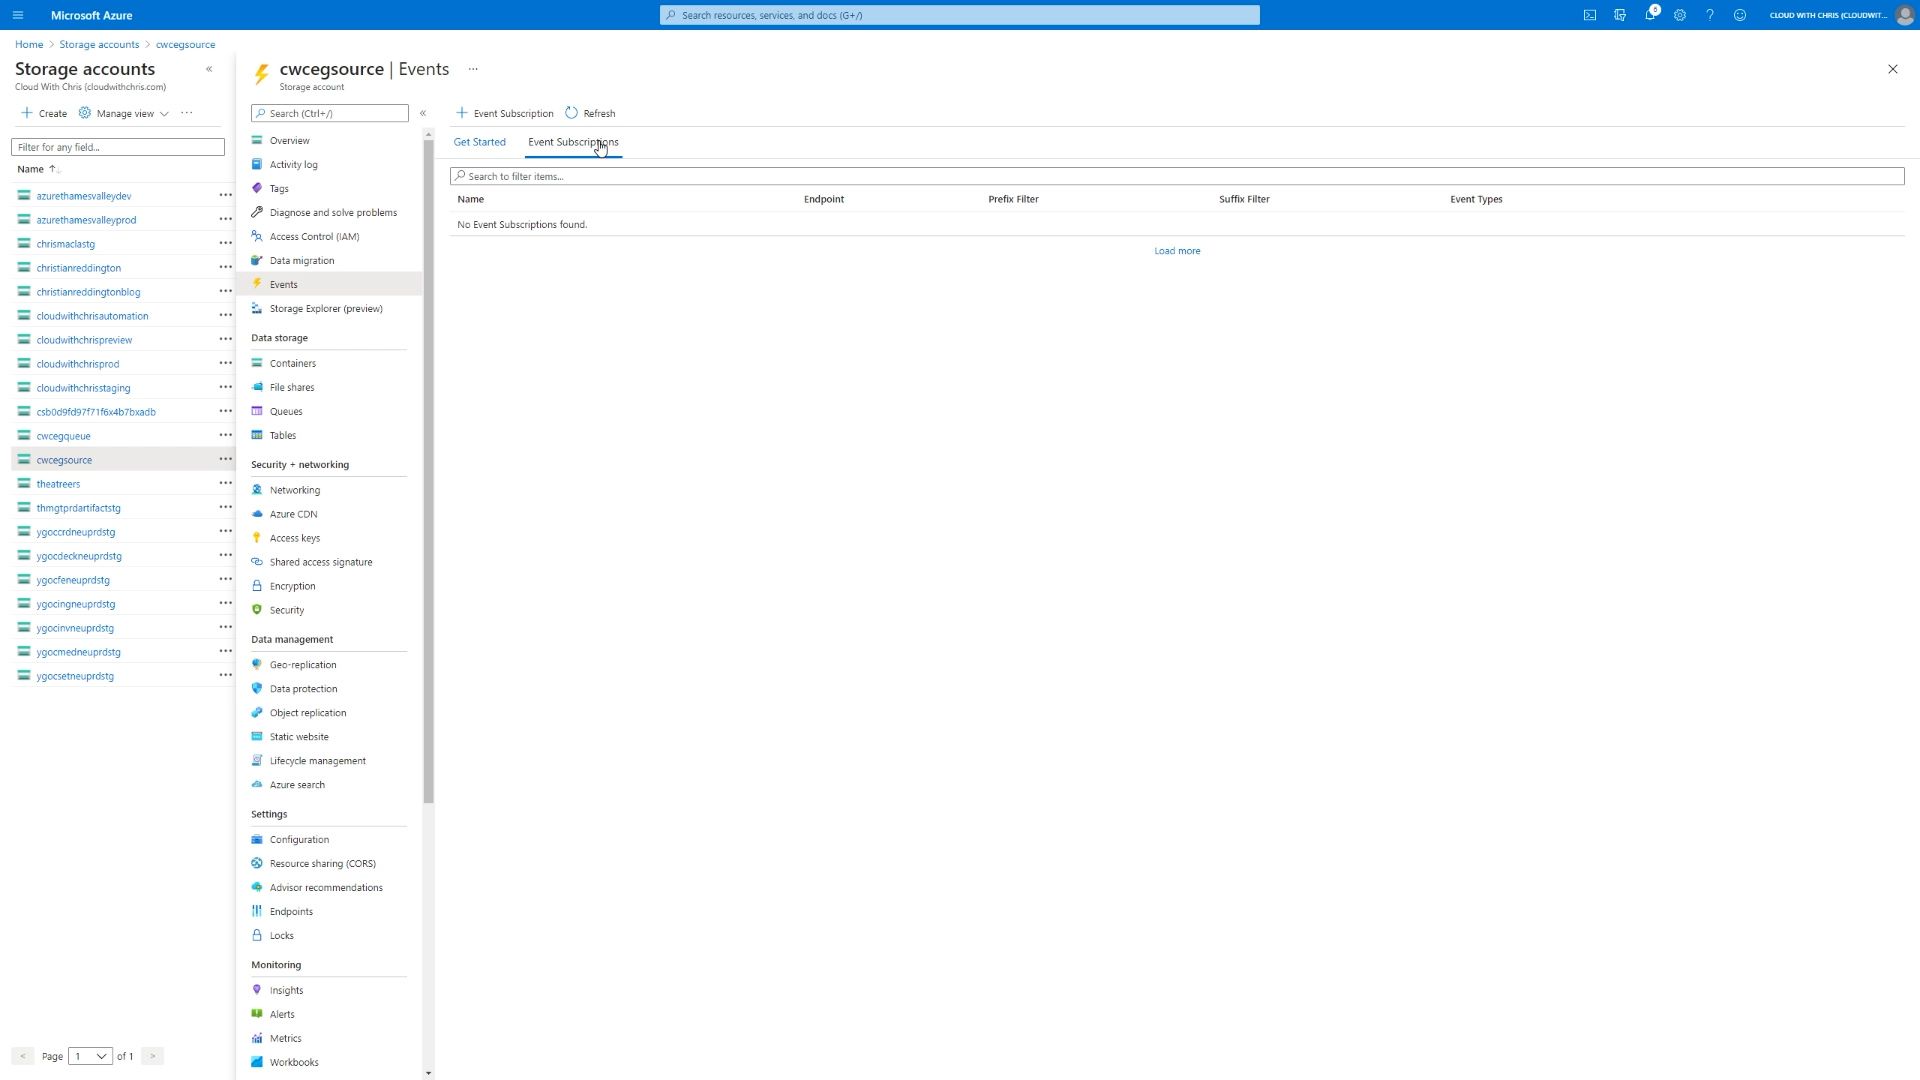 Screenshot showing the events section of the source storage account